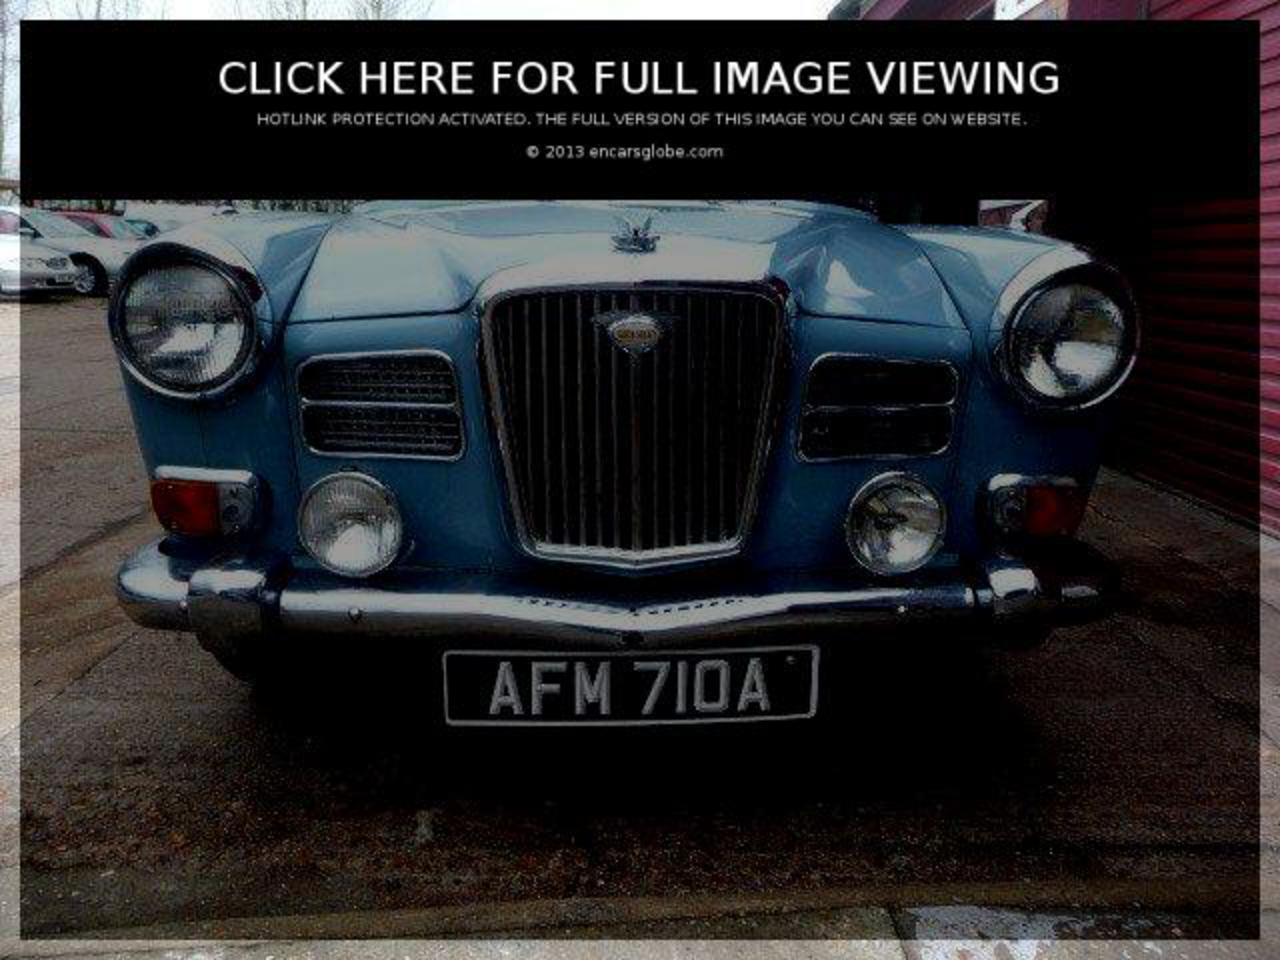 Wolseley 1660 saloon: Photo gallery, complete information about ...